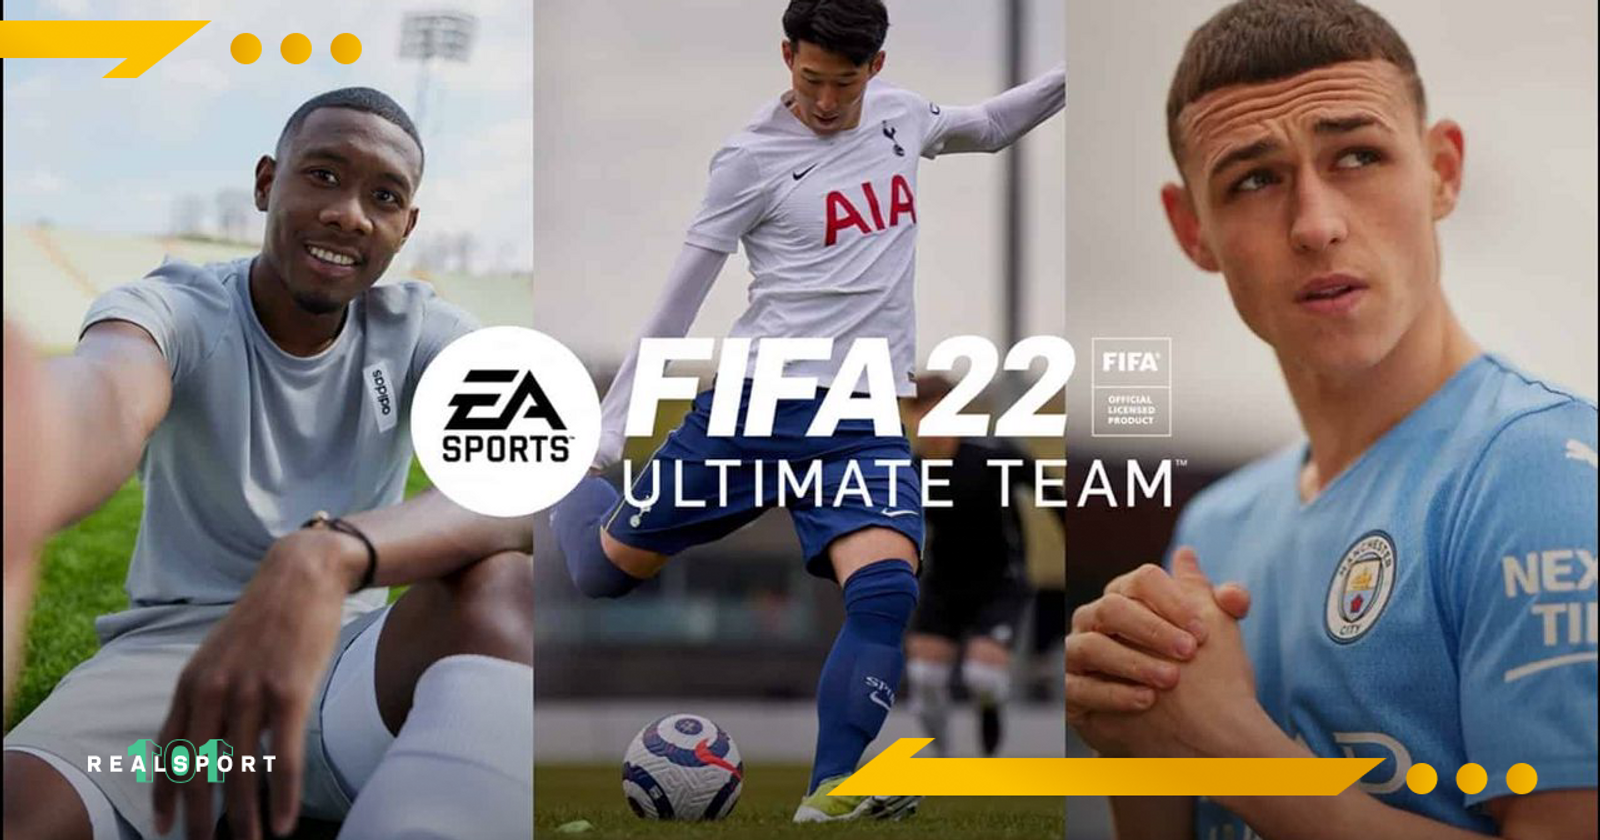 Be The Next Generation in FIFA 22 - EA SPORTS Official Site